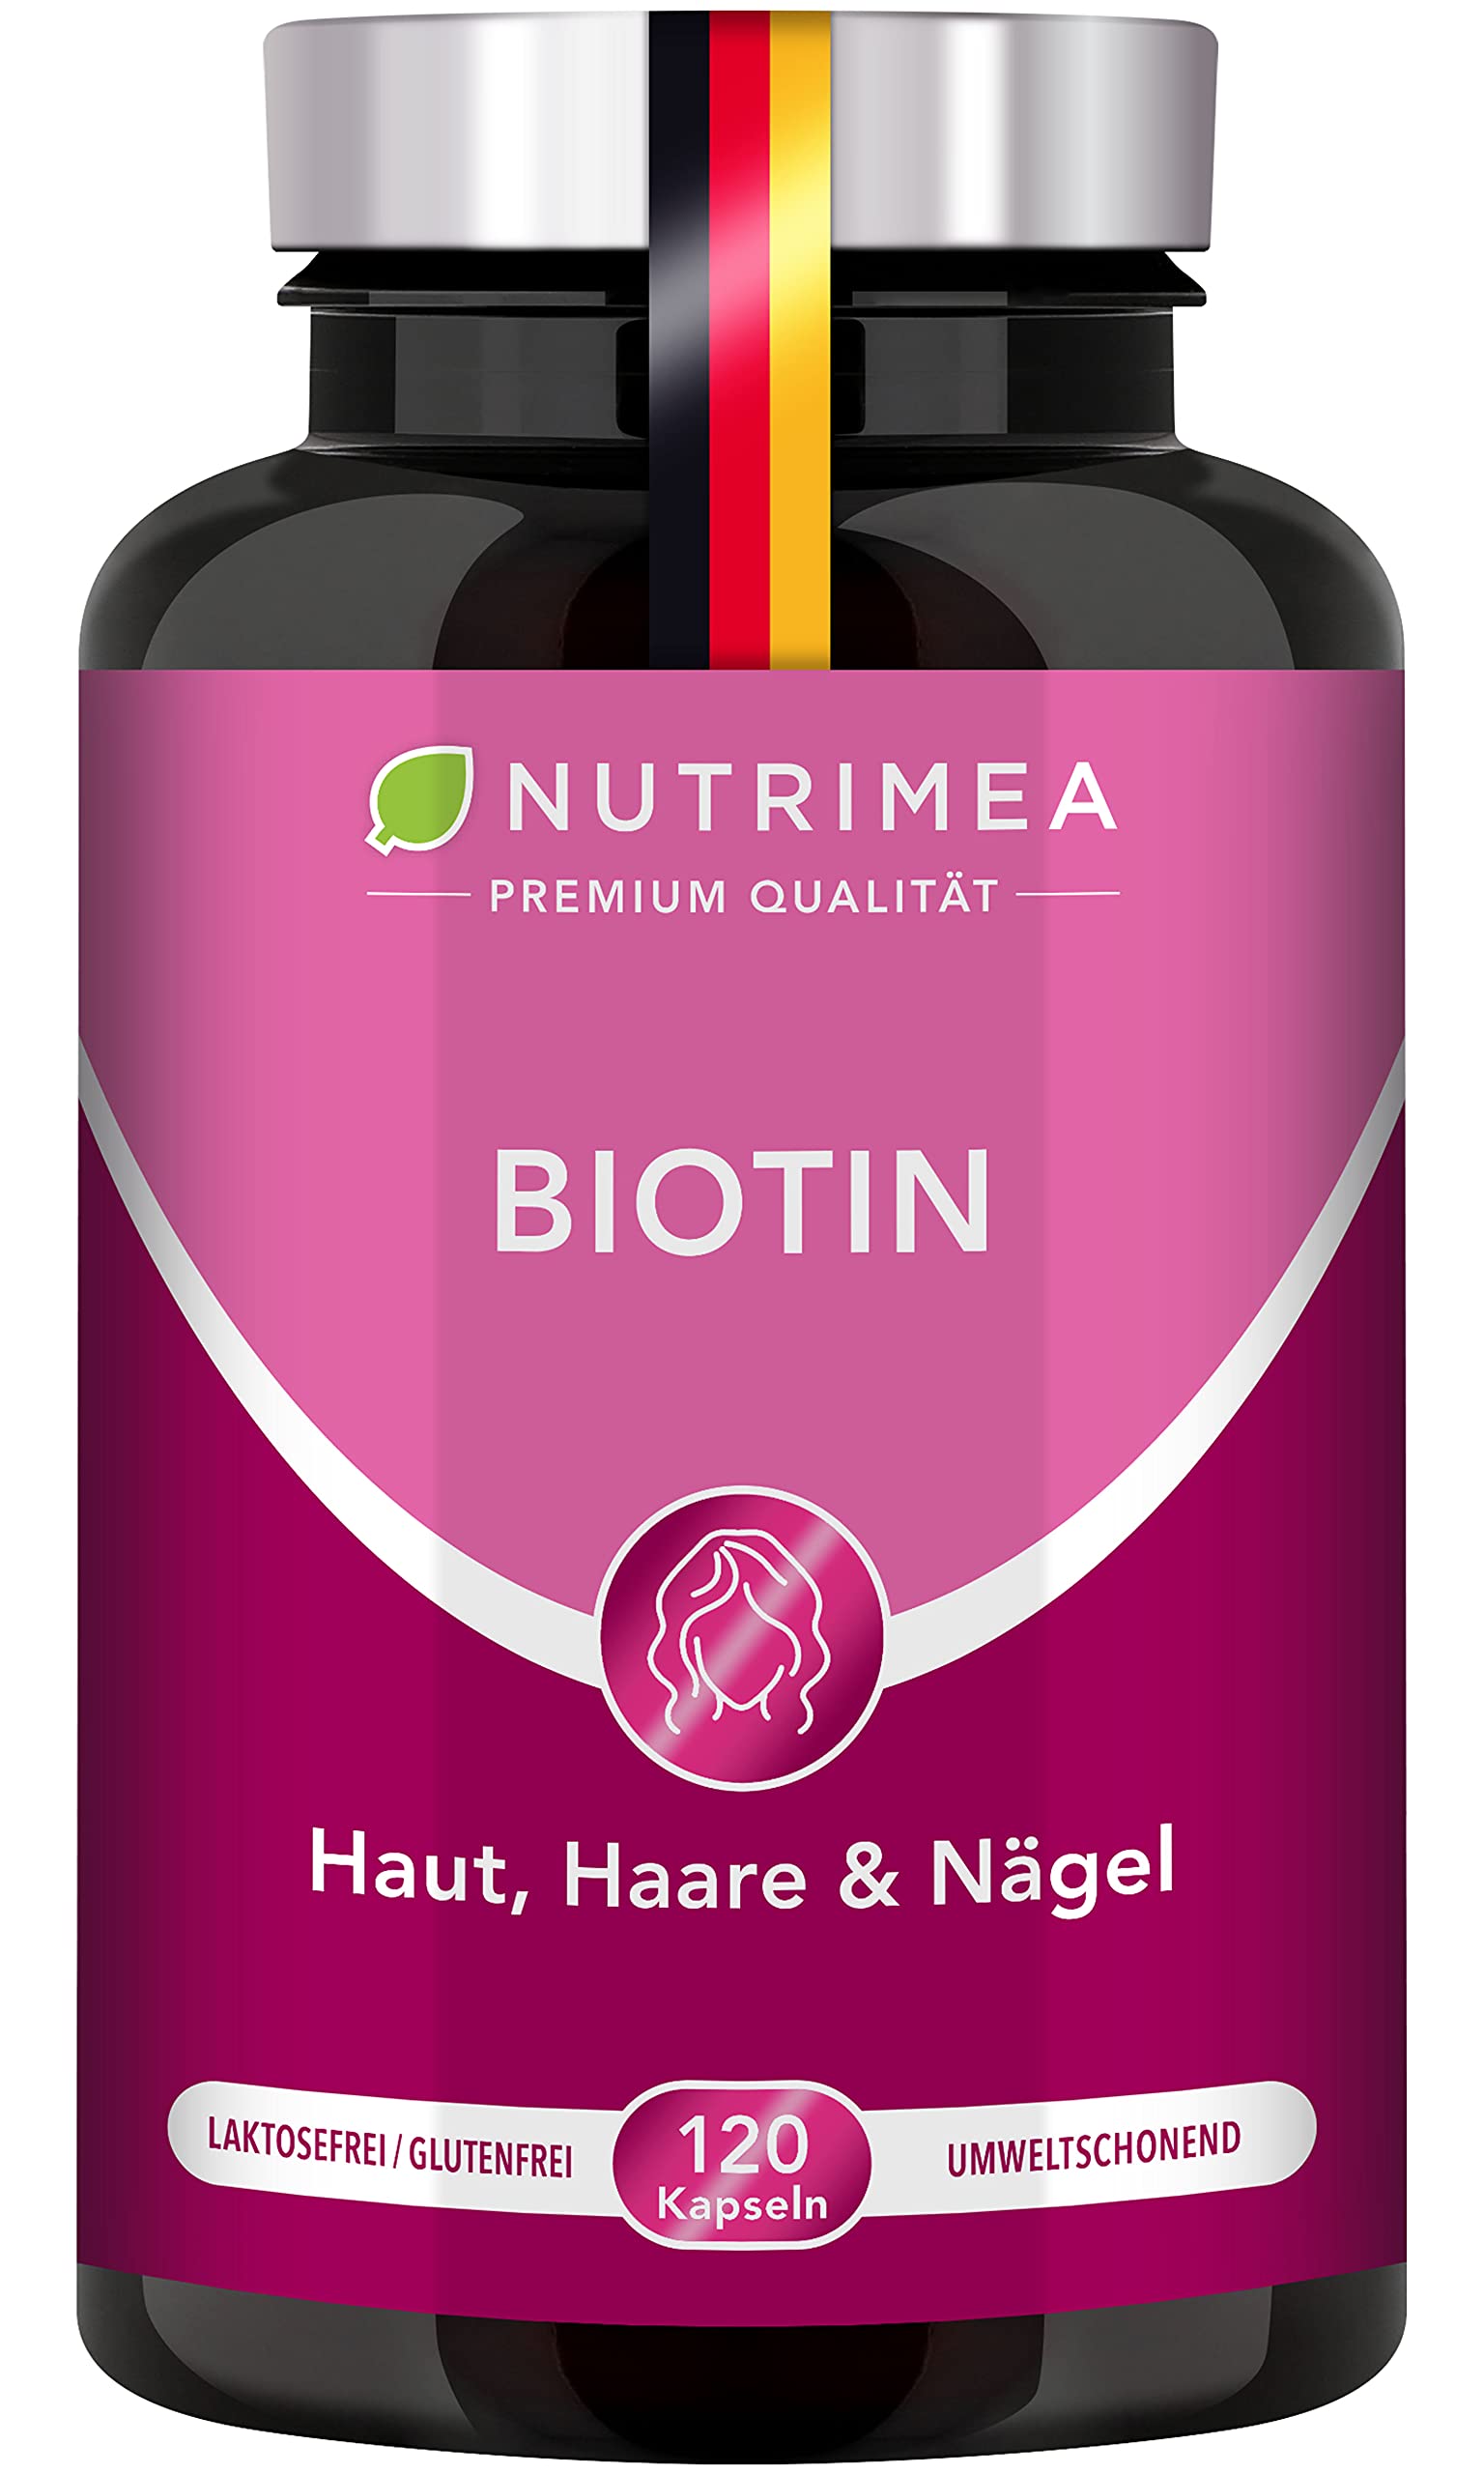 Mua Biotin Hair Vital + Zinc & Selenium for Healthy Skin, Hair & Nails |  Made in Germany & Laboratory Tested - 4-Month Intensive Treatment with Only  1 Capsule Daily | 100%